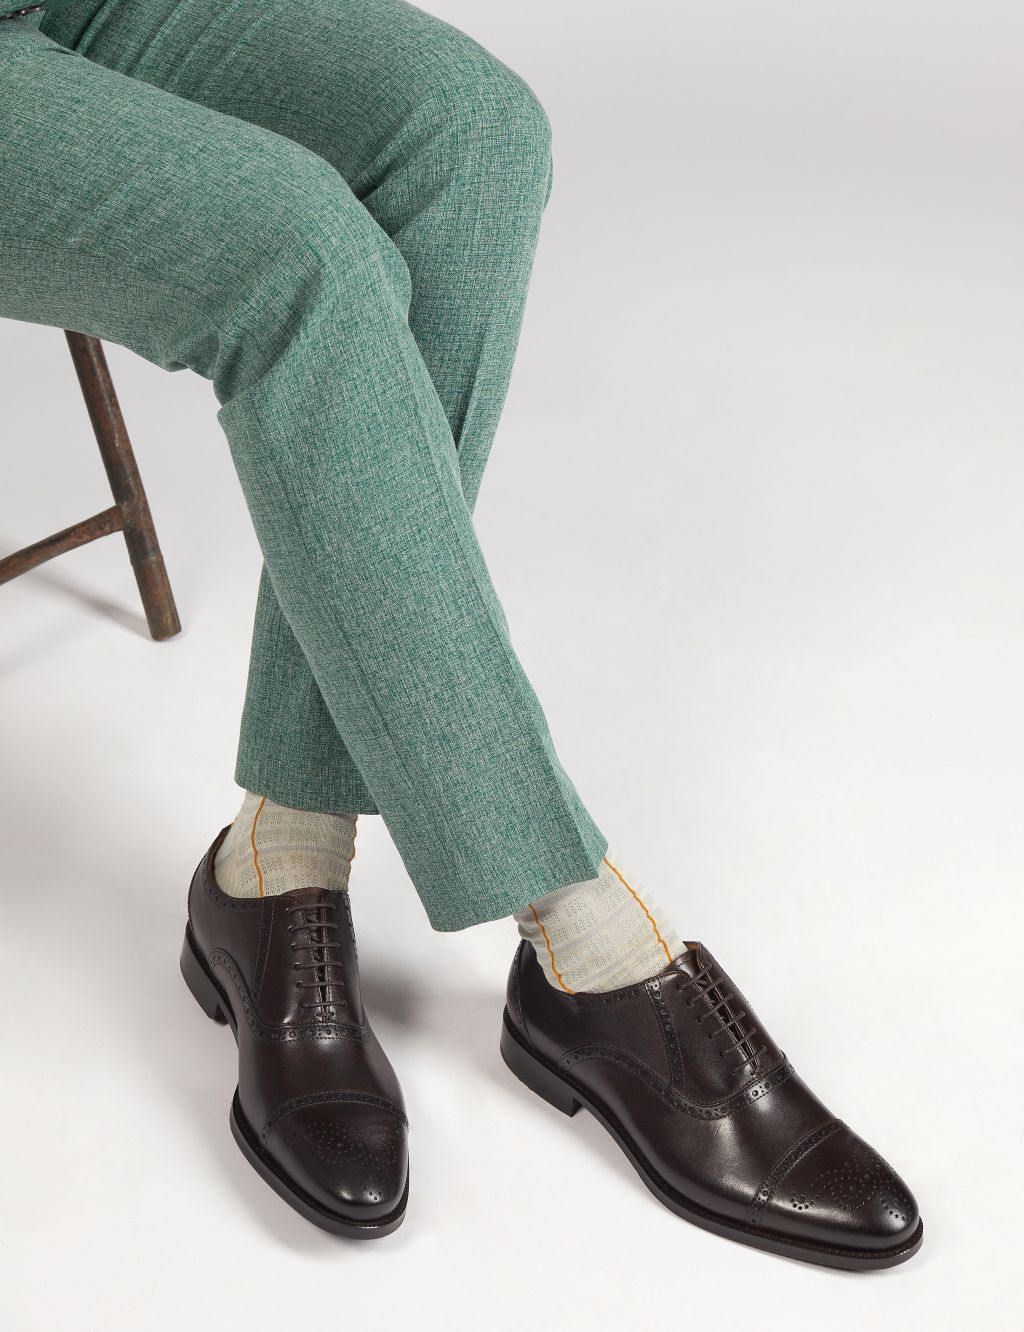 Leather Brogues image 1